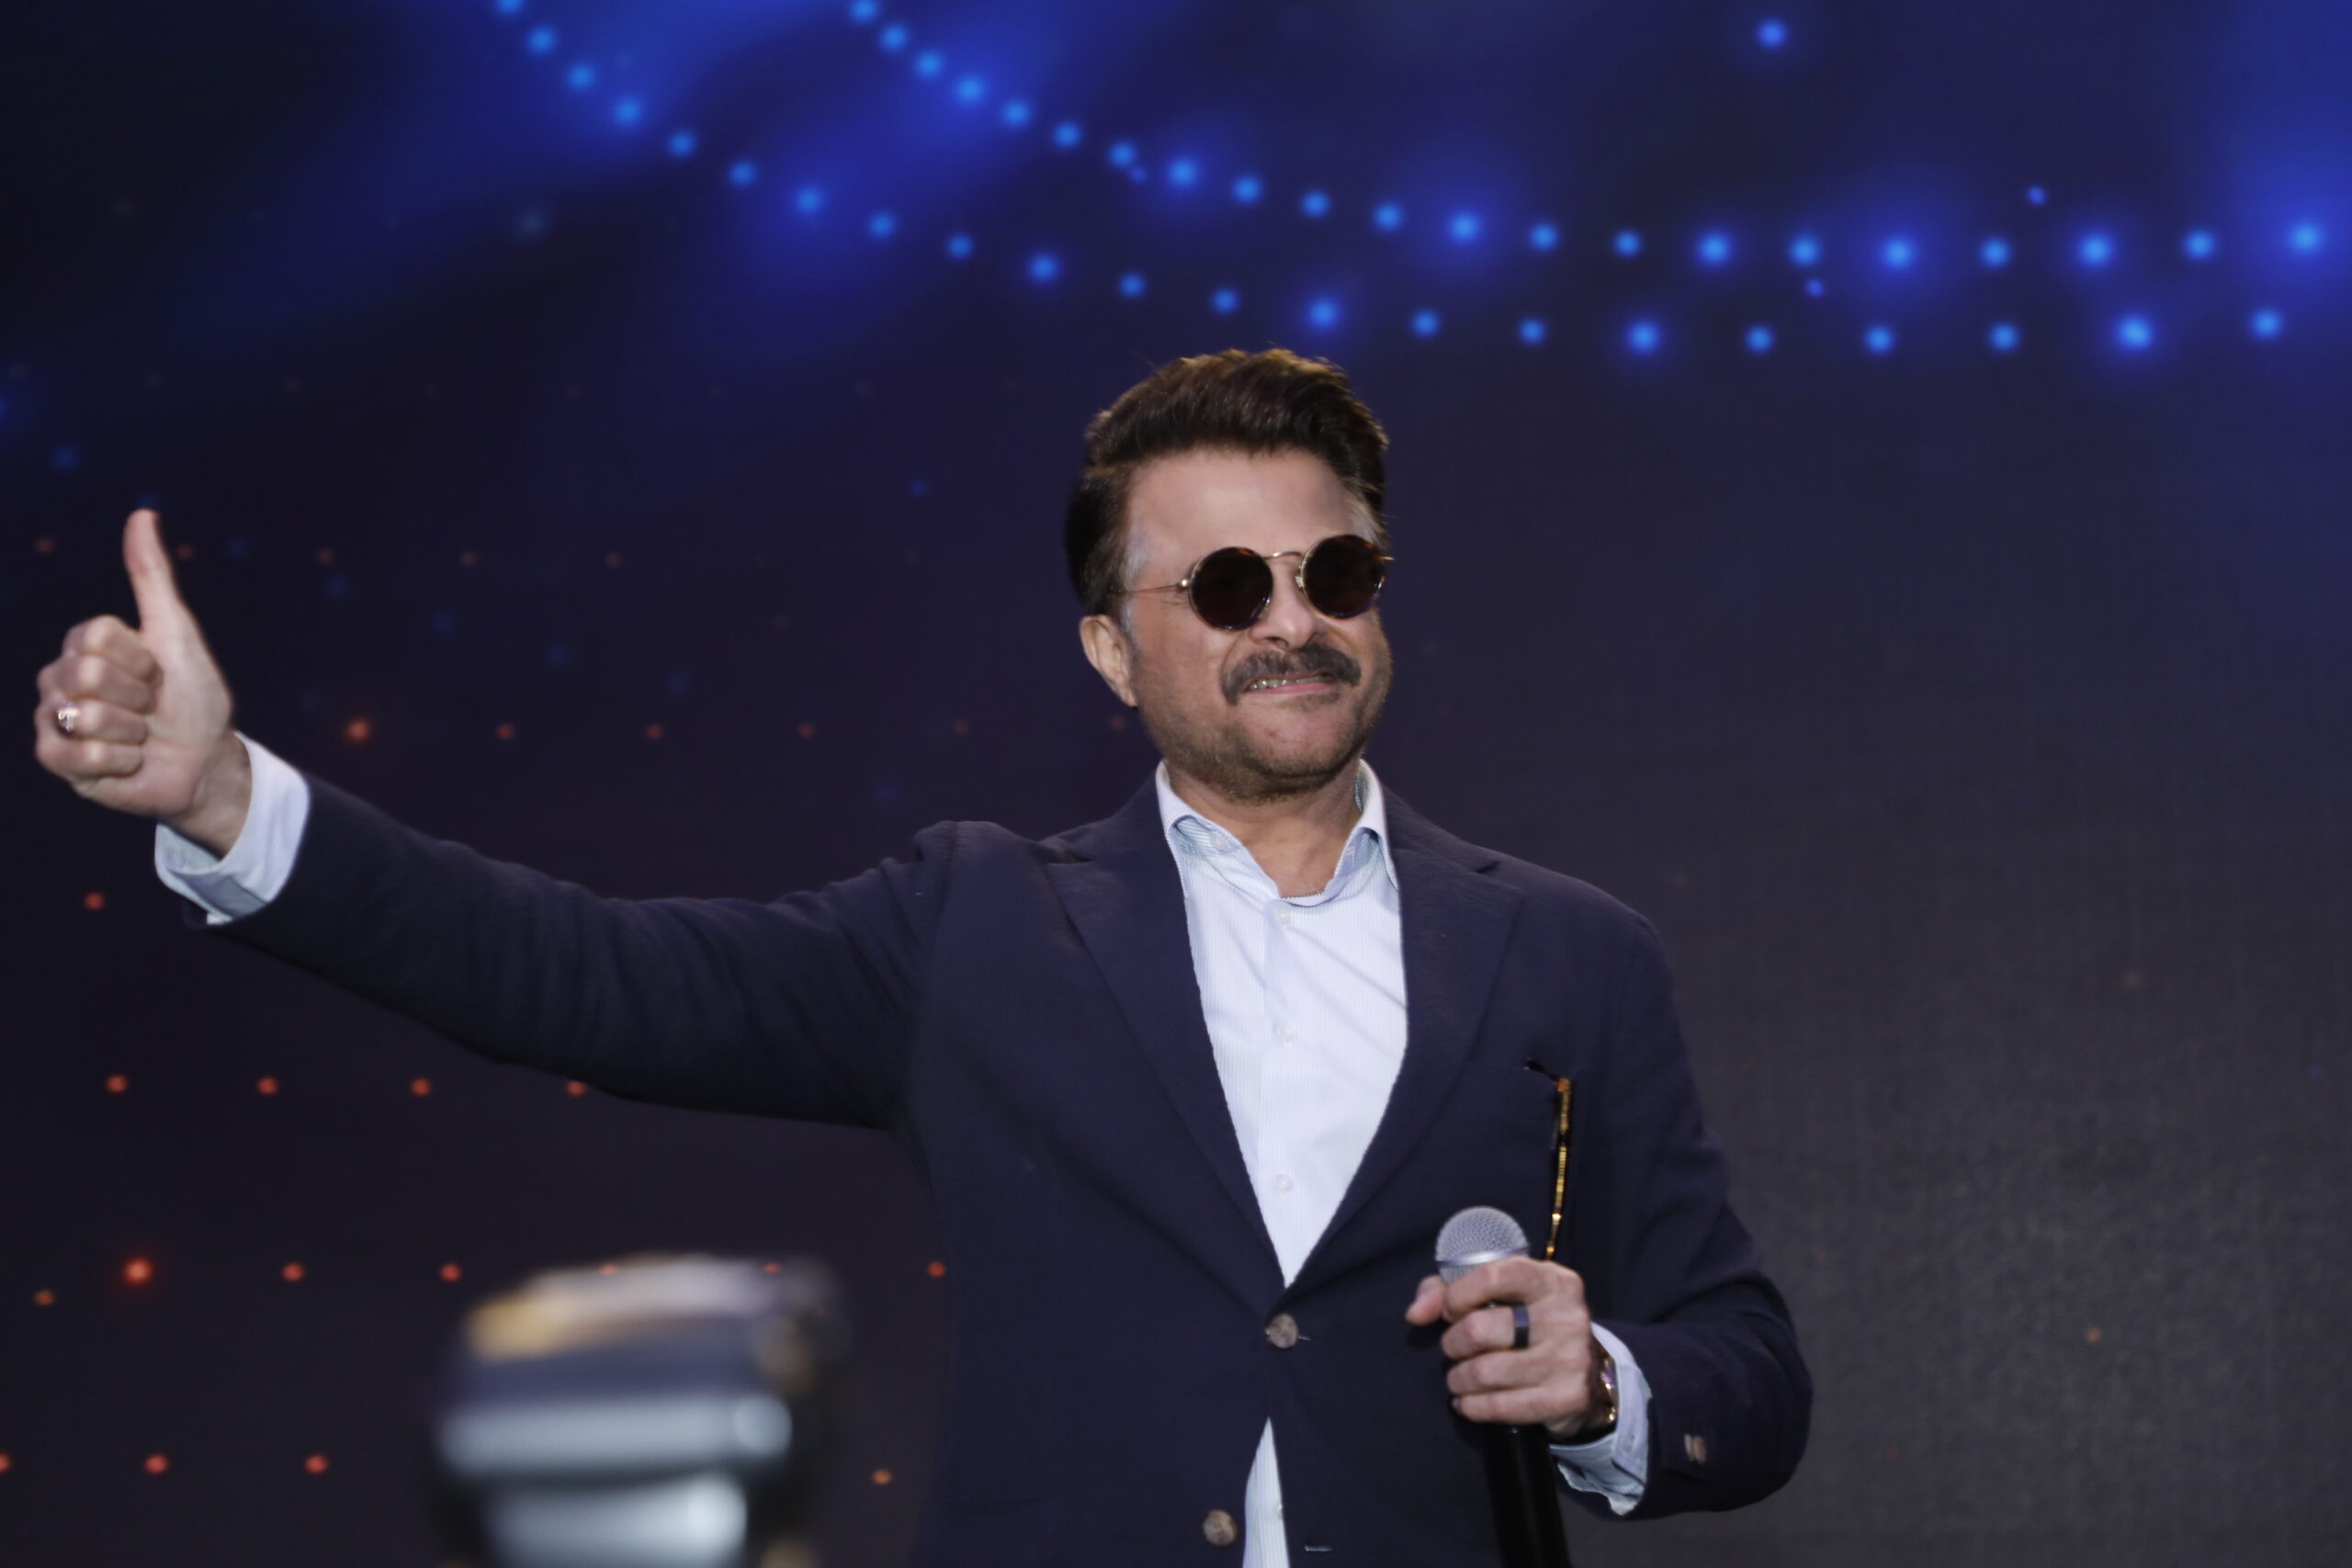 Anil Kapoor as a motivational speaker at a corporate event in Mumbai